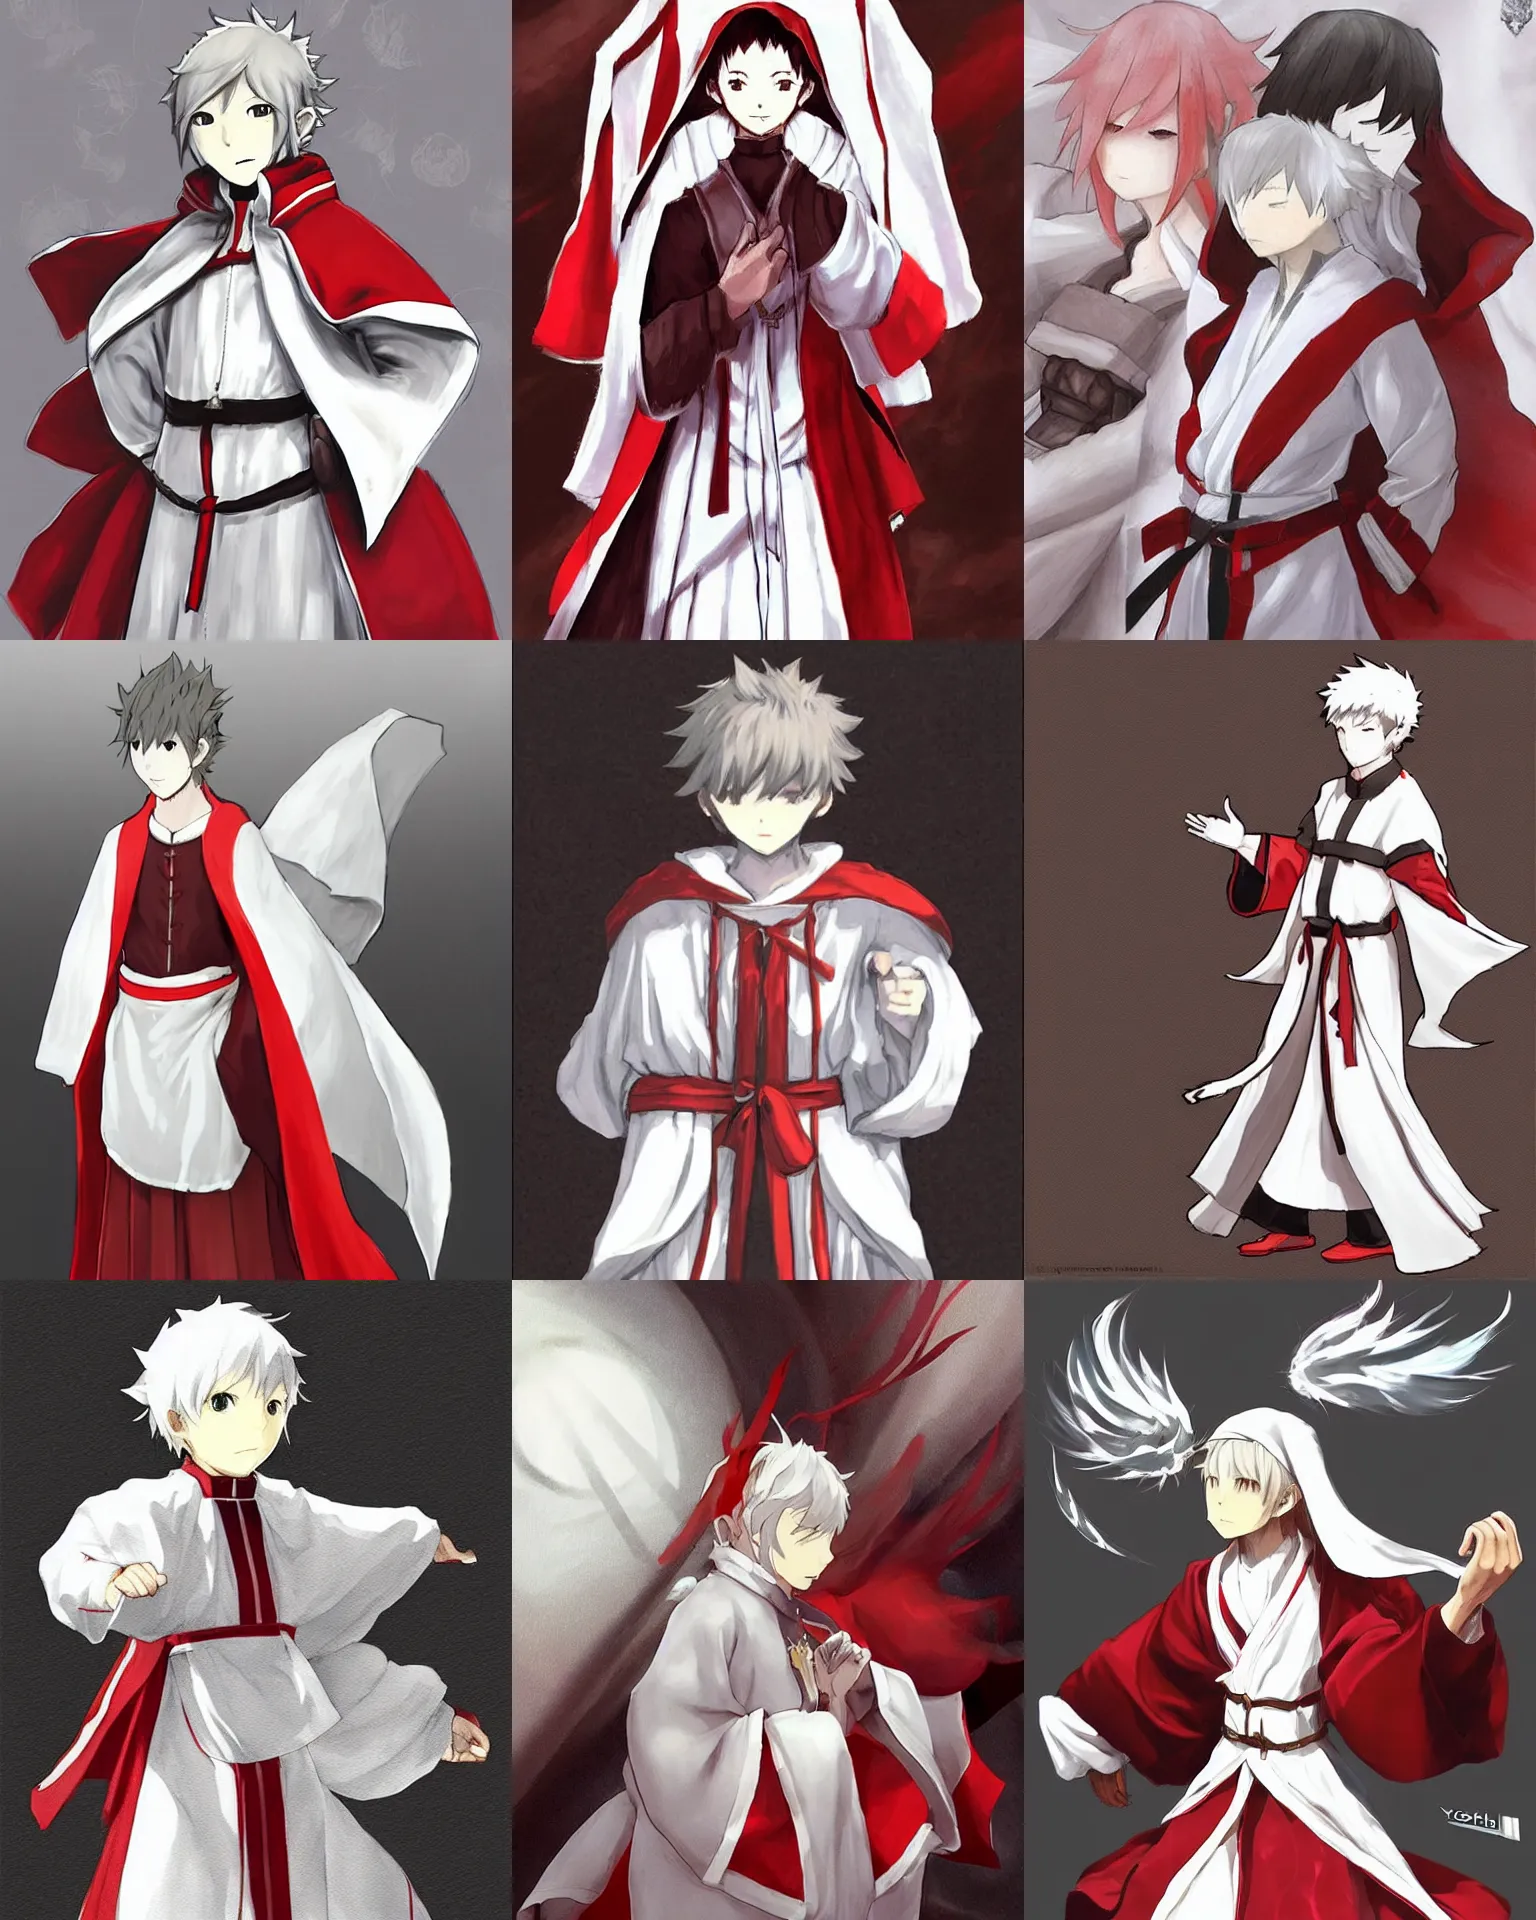 Prompt: “ art by yoshida akihiko in his bravely default style, a young priest in white and red robes. concept art, detailed, warm, hopeful. ”